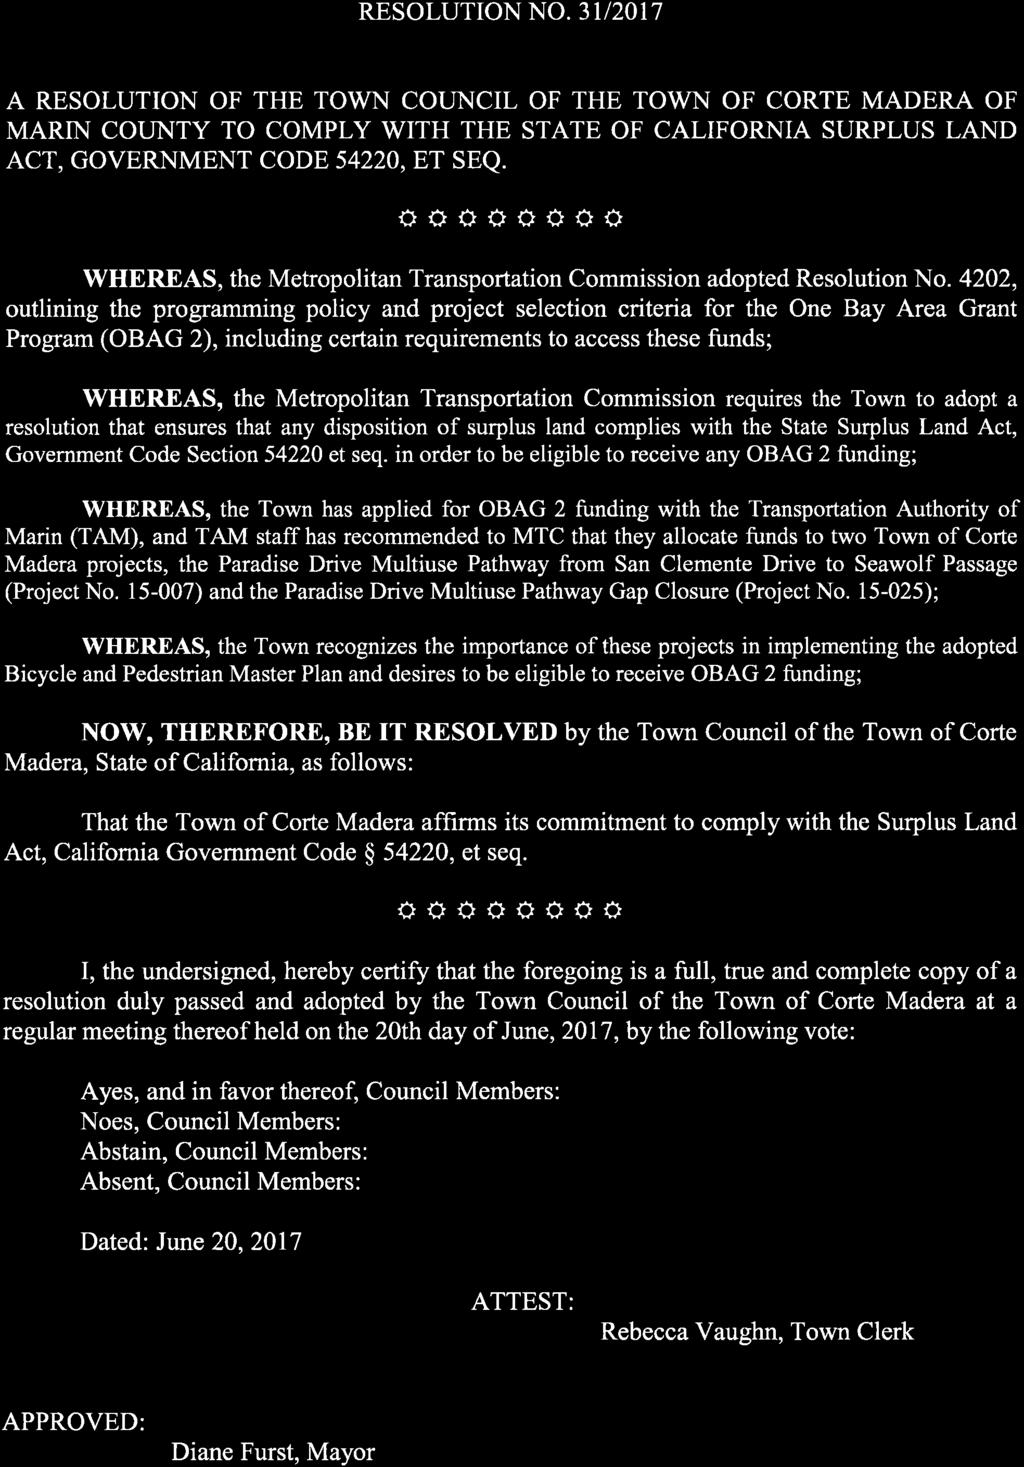 RESOLUTION NO. 3T/2017 A RESOLUTION OF THE TOWN COTINCIL OF THE TOWN OF CORTE MADERA OF MARIN COUNTY TO COMPLY V/ITH THE STATE OF CALIFORNIA SURPLUS LAND ACT, GOVERNMENT CODE 54220, ET SEQ.